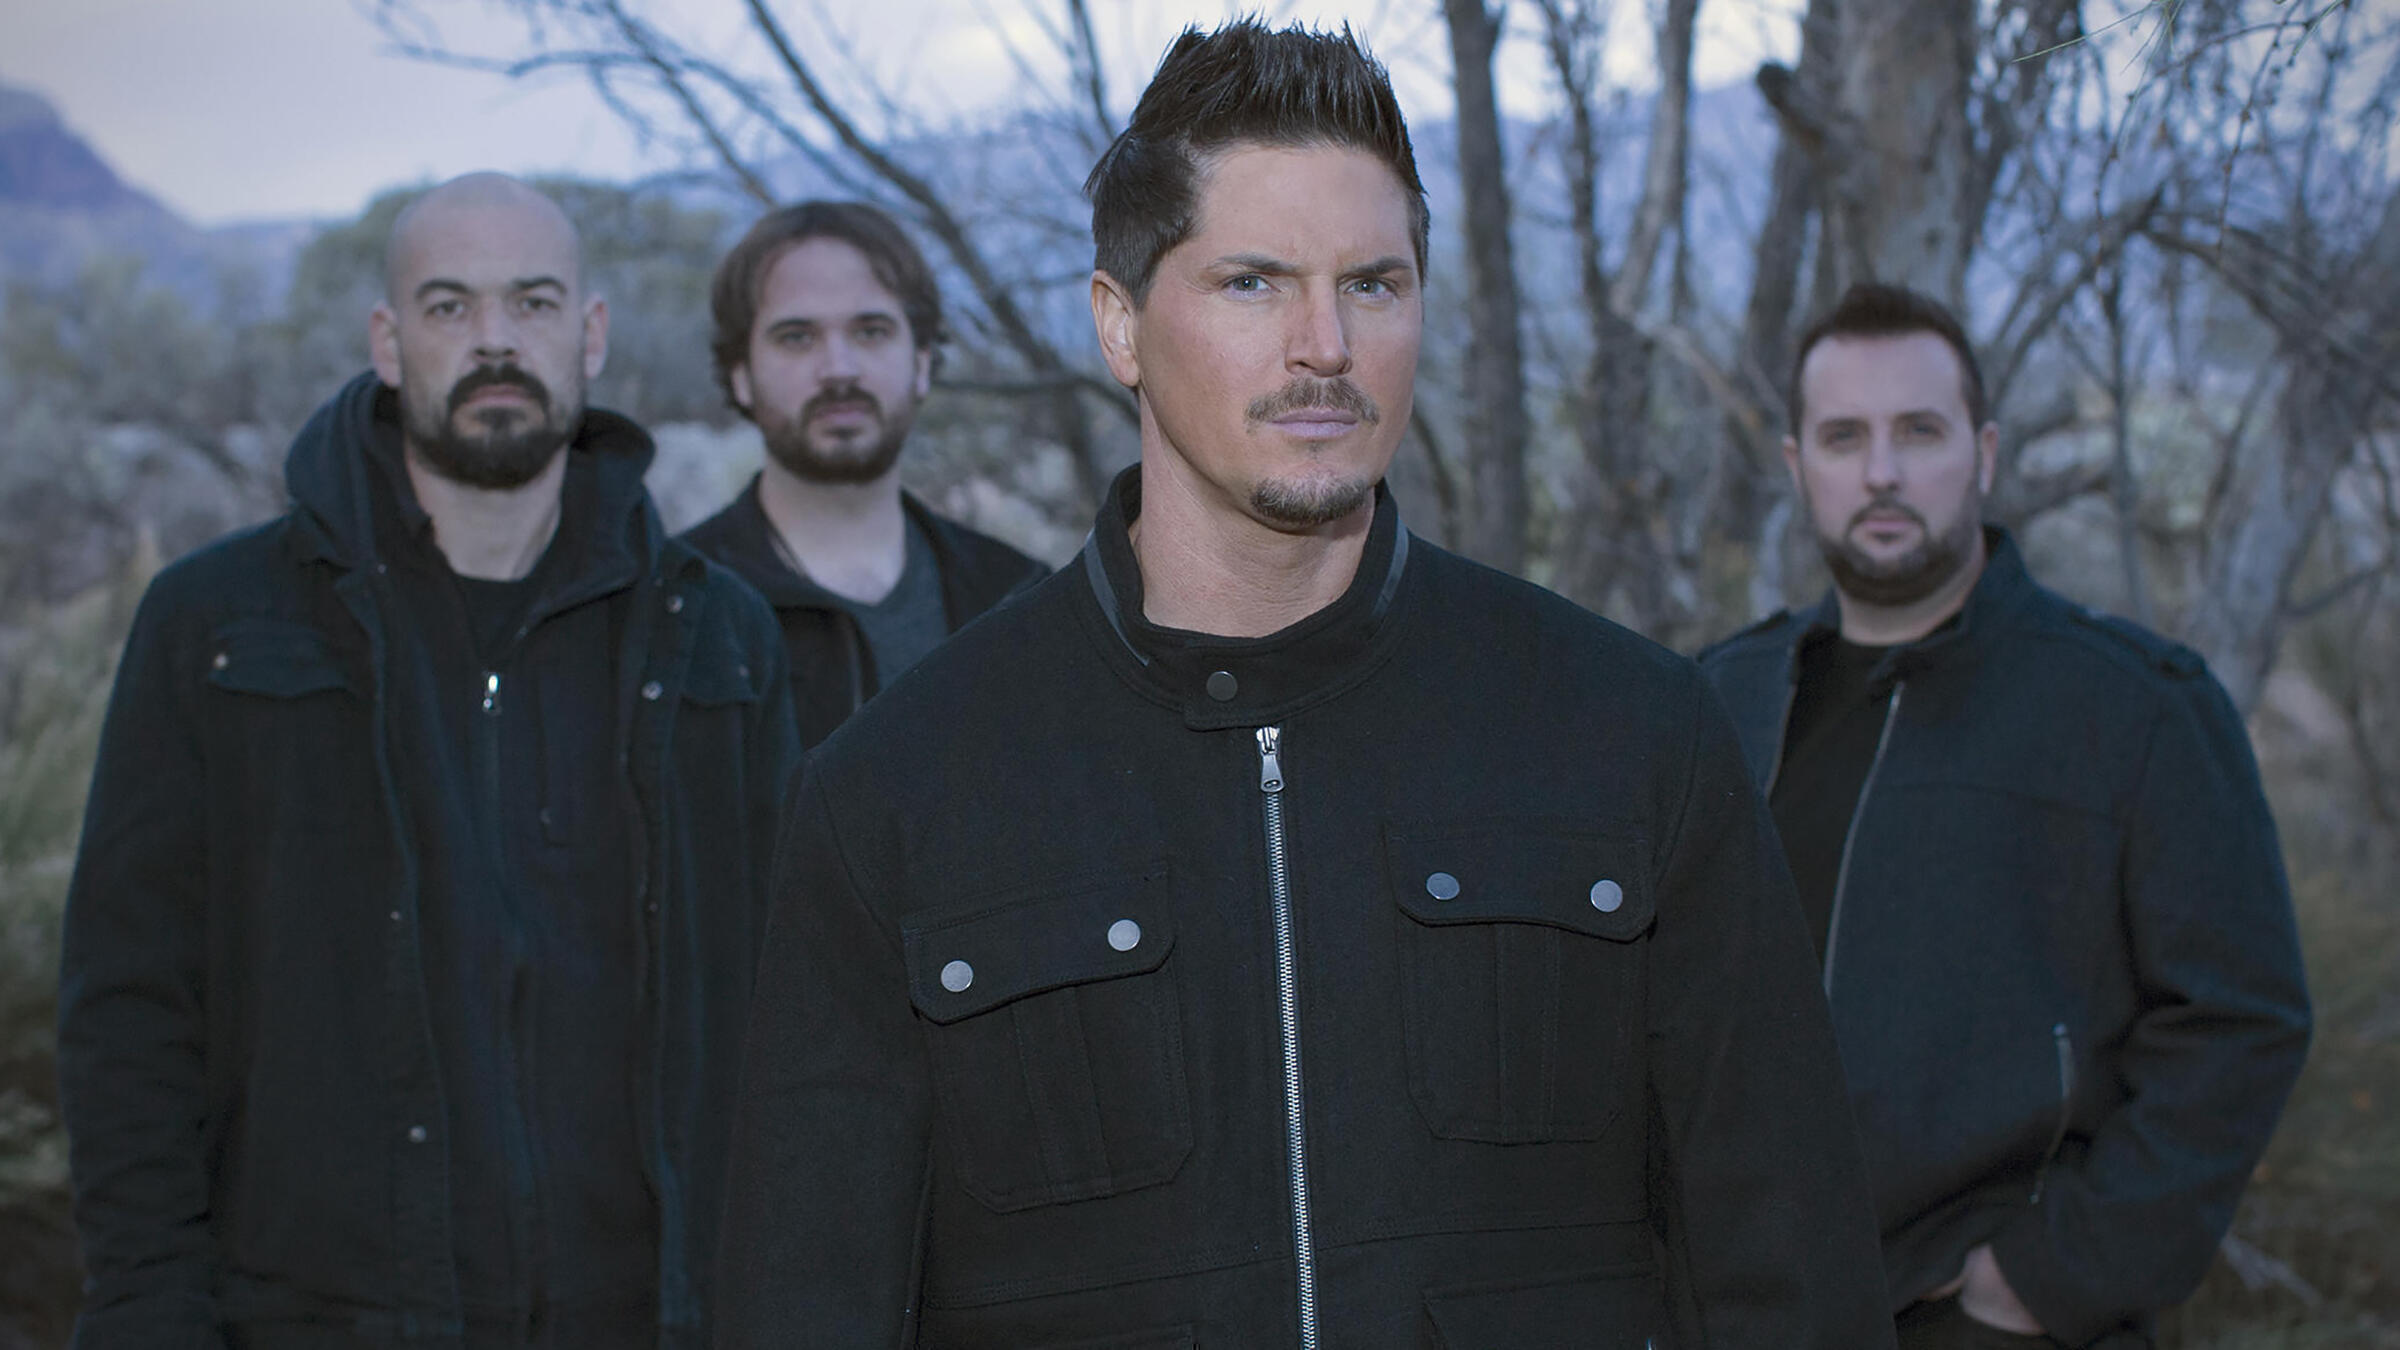 ghost adventures submissions